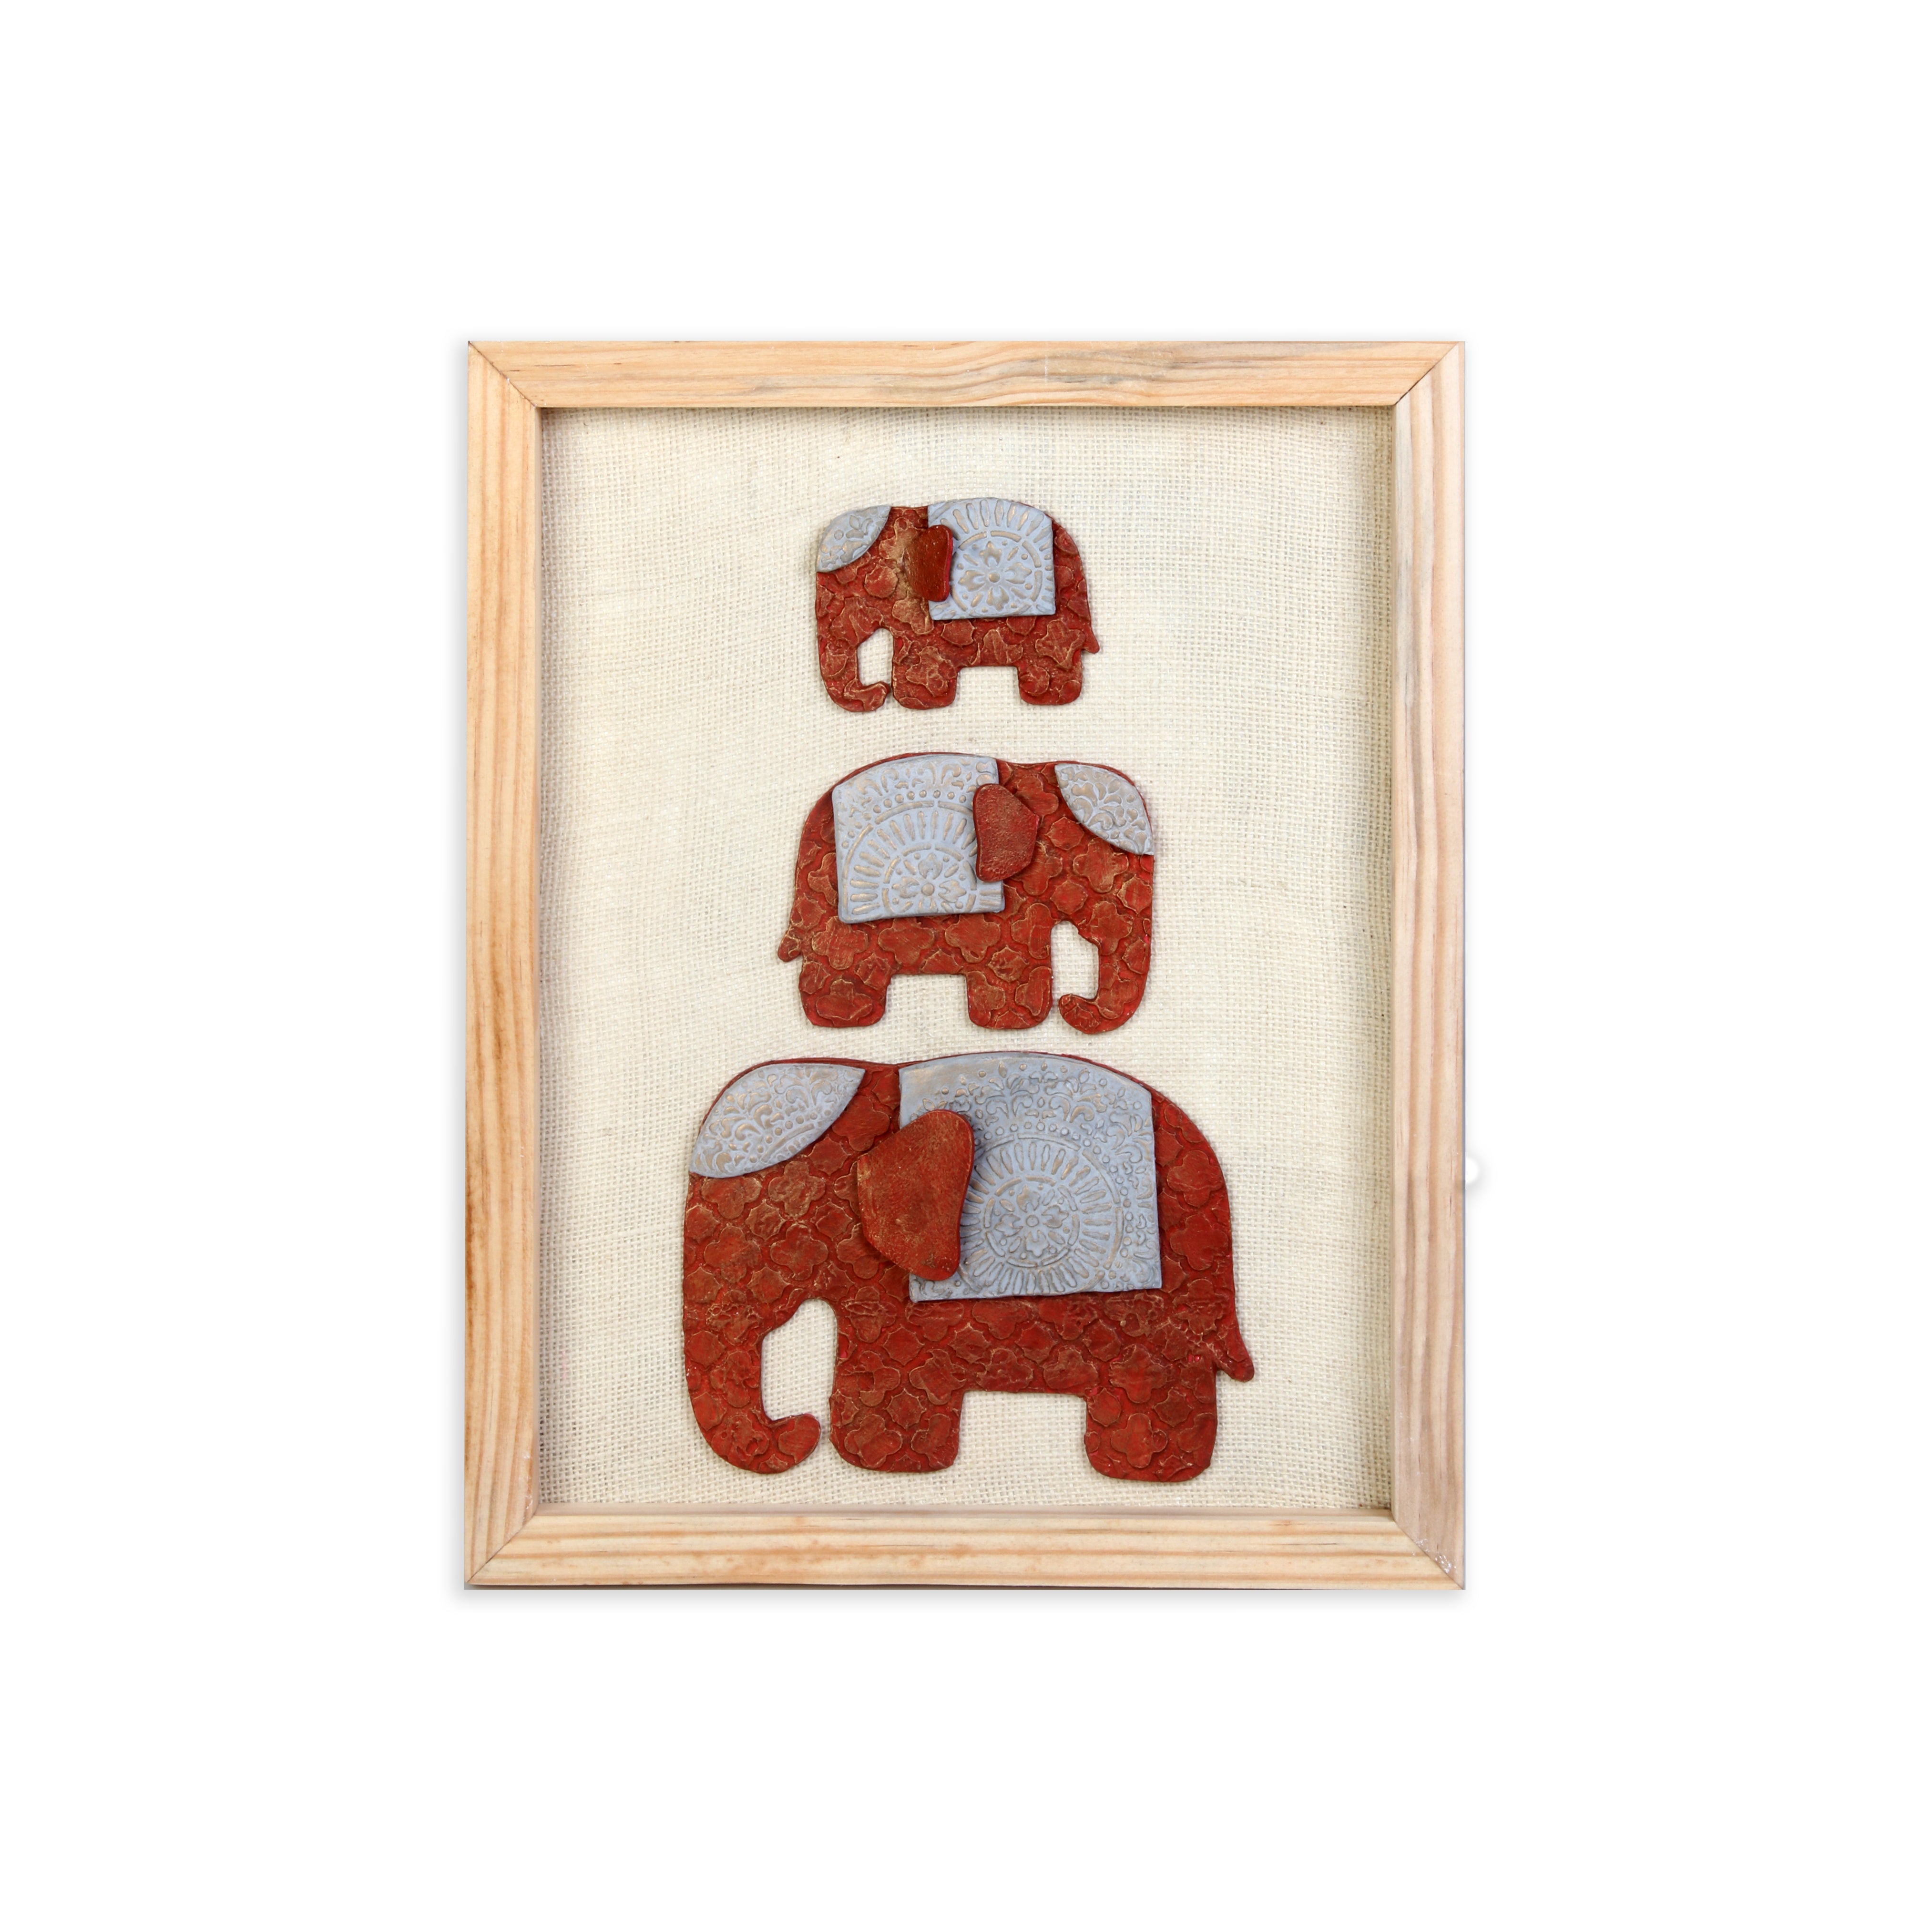 Wall Decor Handmade Majestic Elephant Red and white with Wooden Frame Approx H14 X L11 X D0.66inch